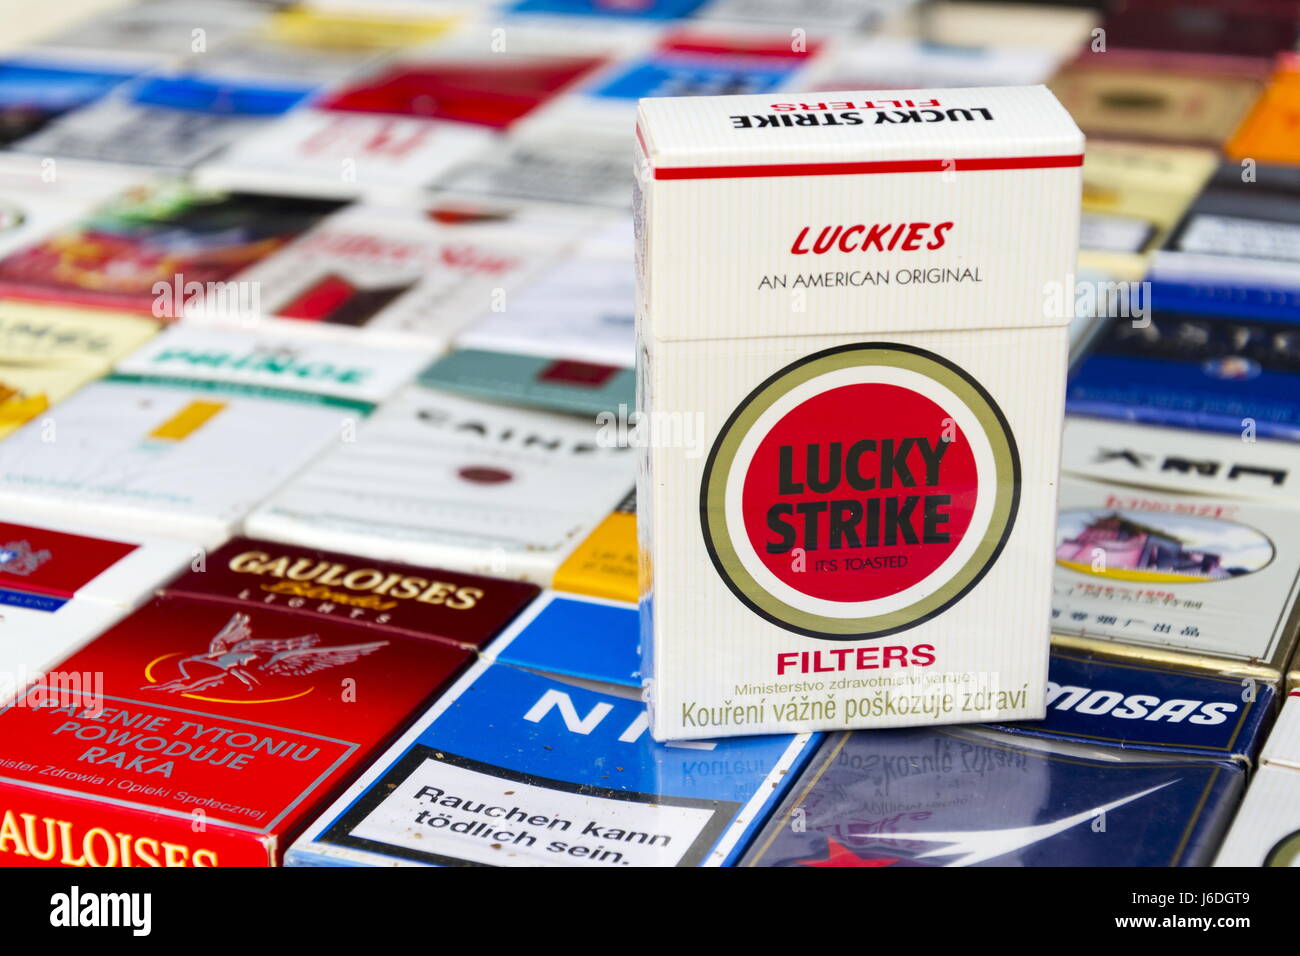 PRAGUE, CZECH REPUBLIC - MARCH 25: Lucky Strike pack on many different cigarettes photographed on March 25, 2017 in Prague, Czech republic. Stock Photo